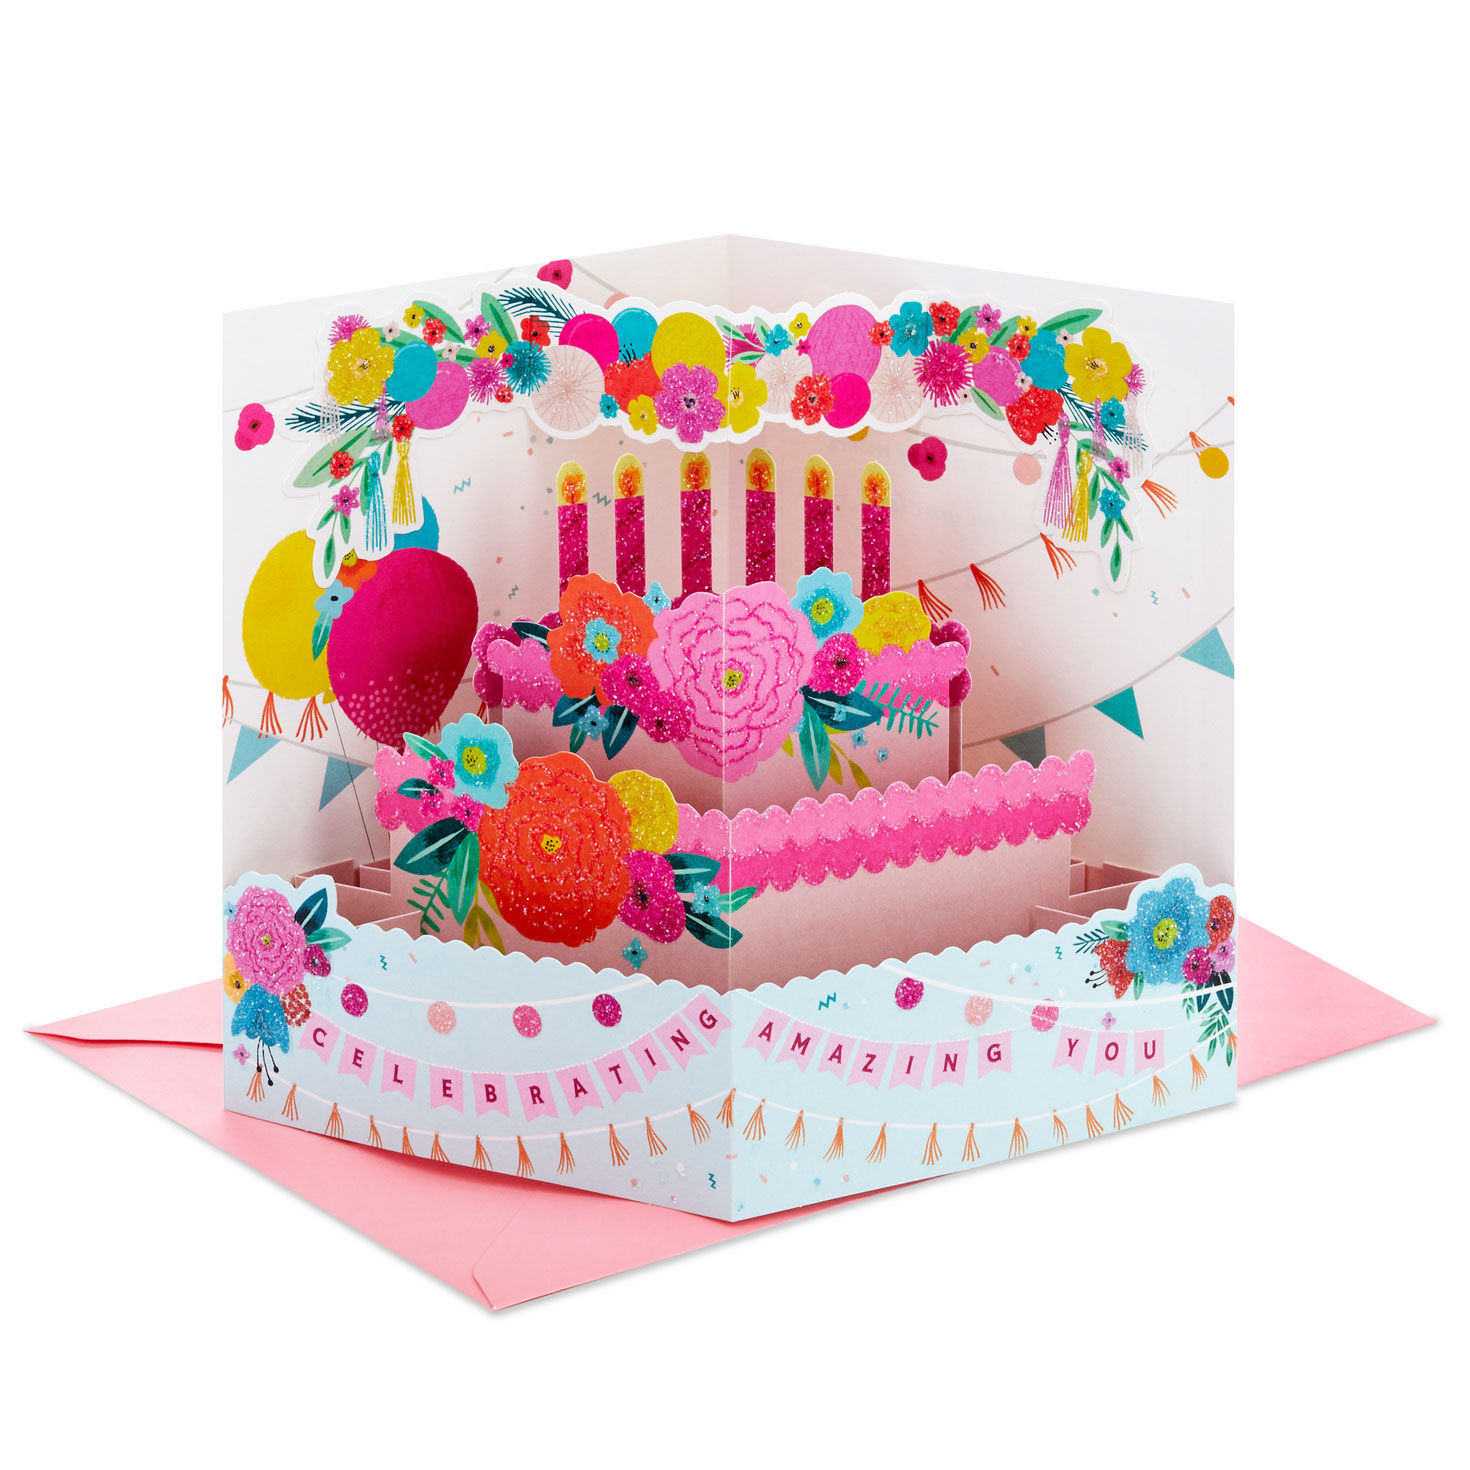 Celebrating Amazing You 3D Pop-Up Birthday Card for only USD 6.99 | Hallmark